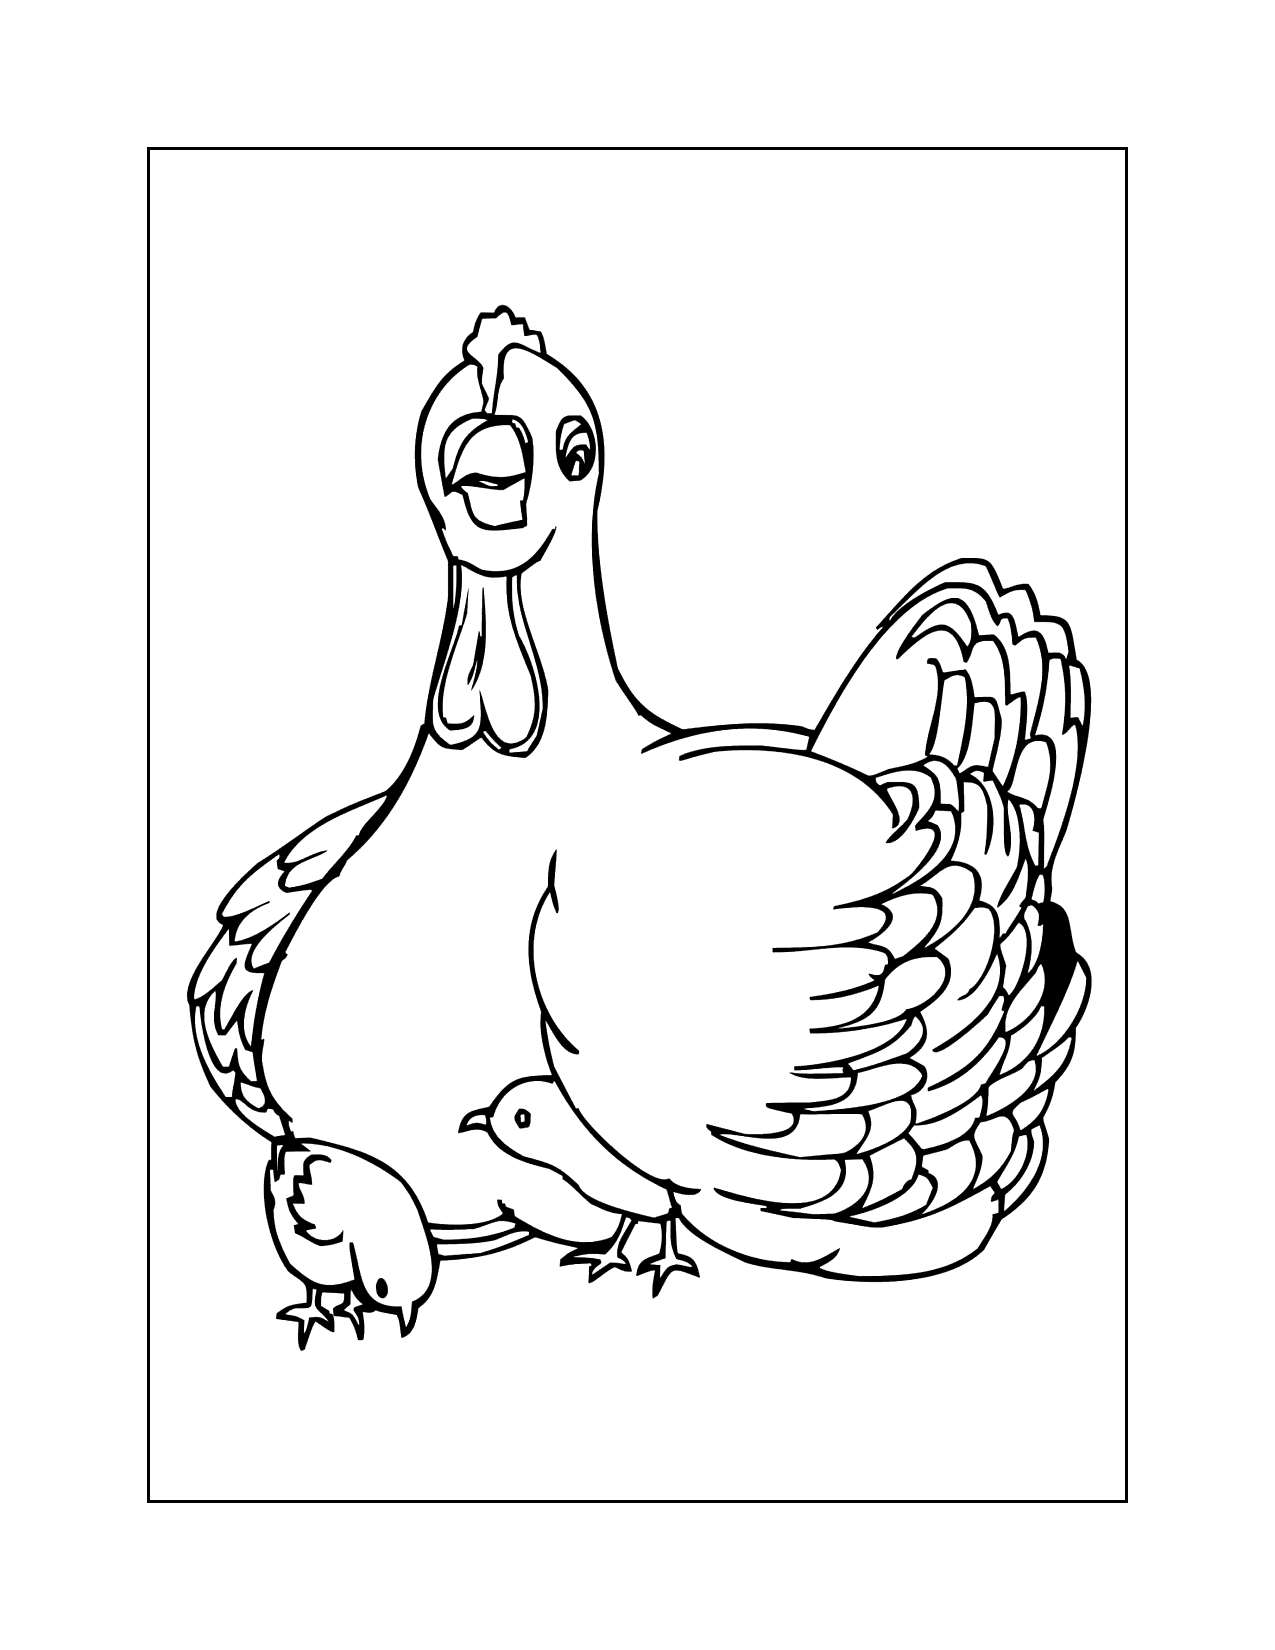 Hen And Chicks Coloring Page